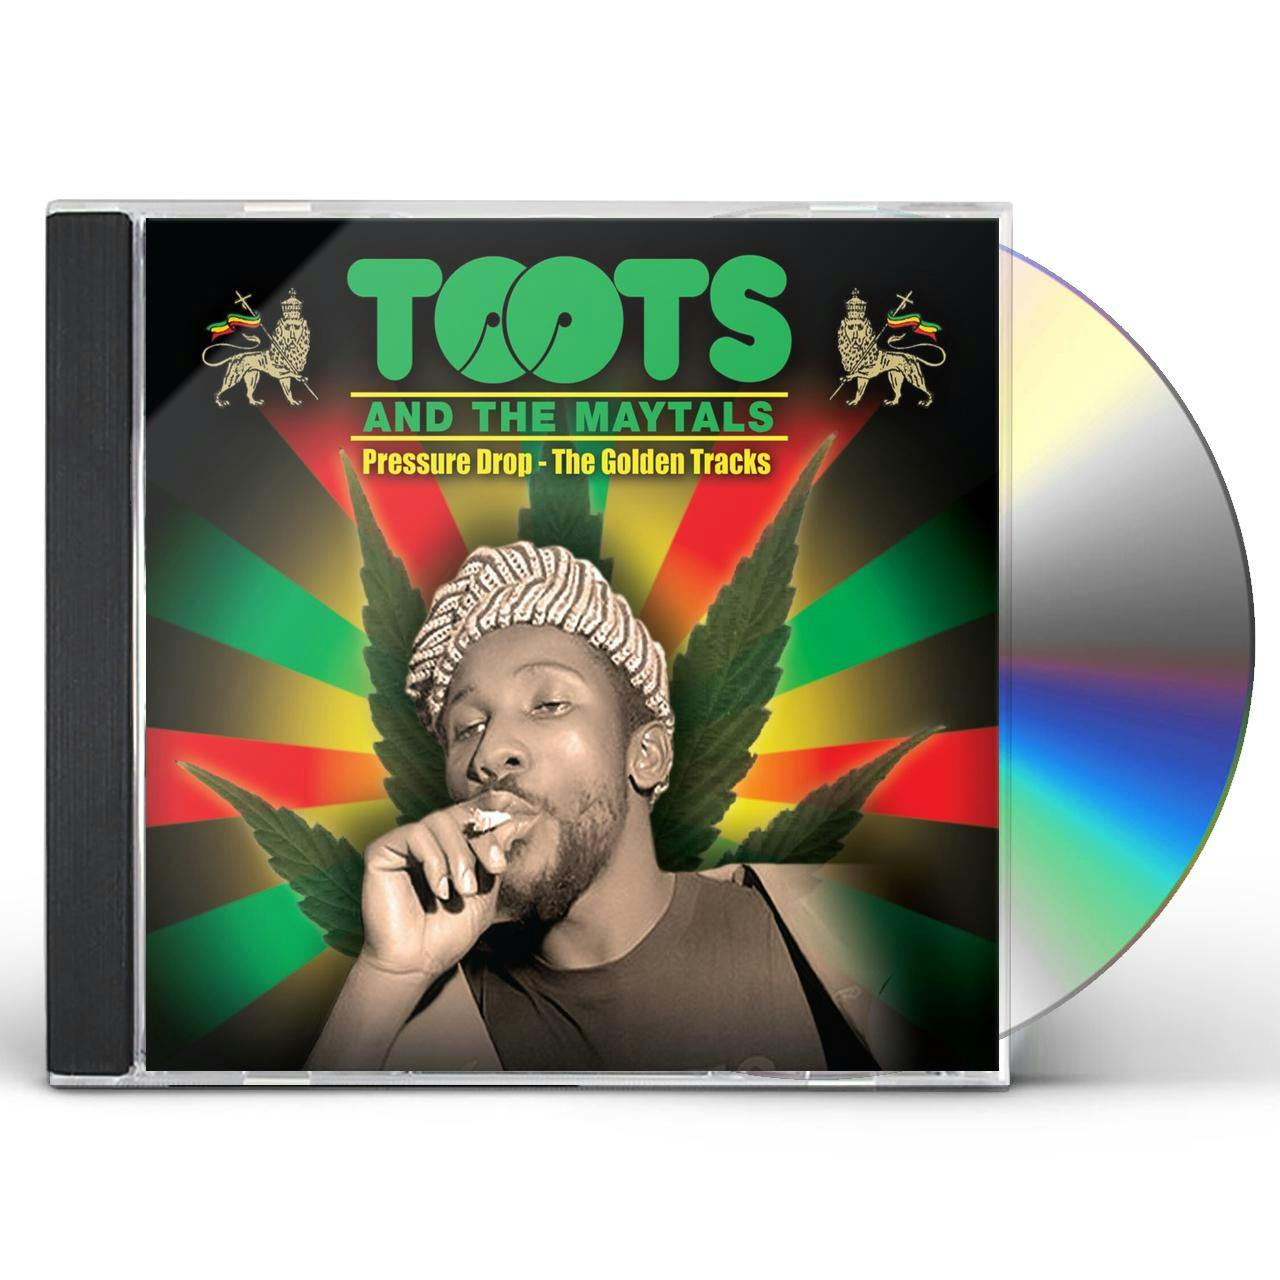 DROP　Maytals　CD　GOLDEN　PRESSURE　THE　The　Toots　TRACKS